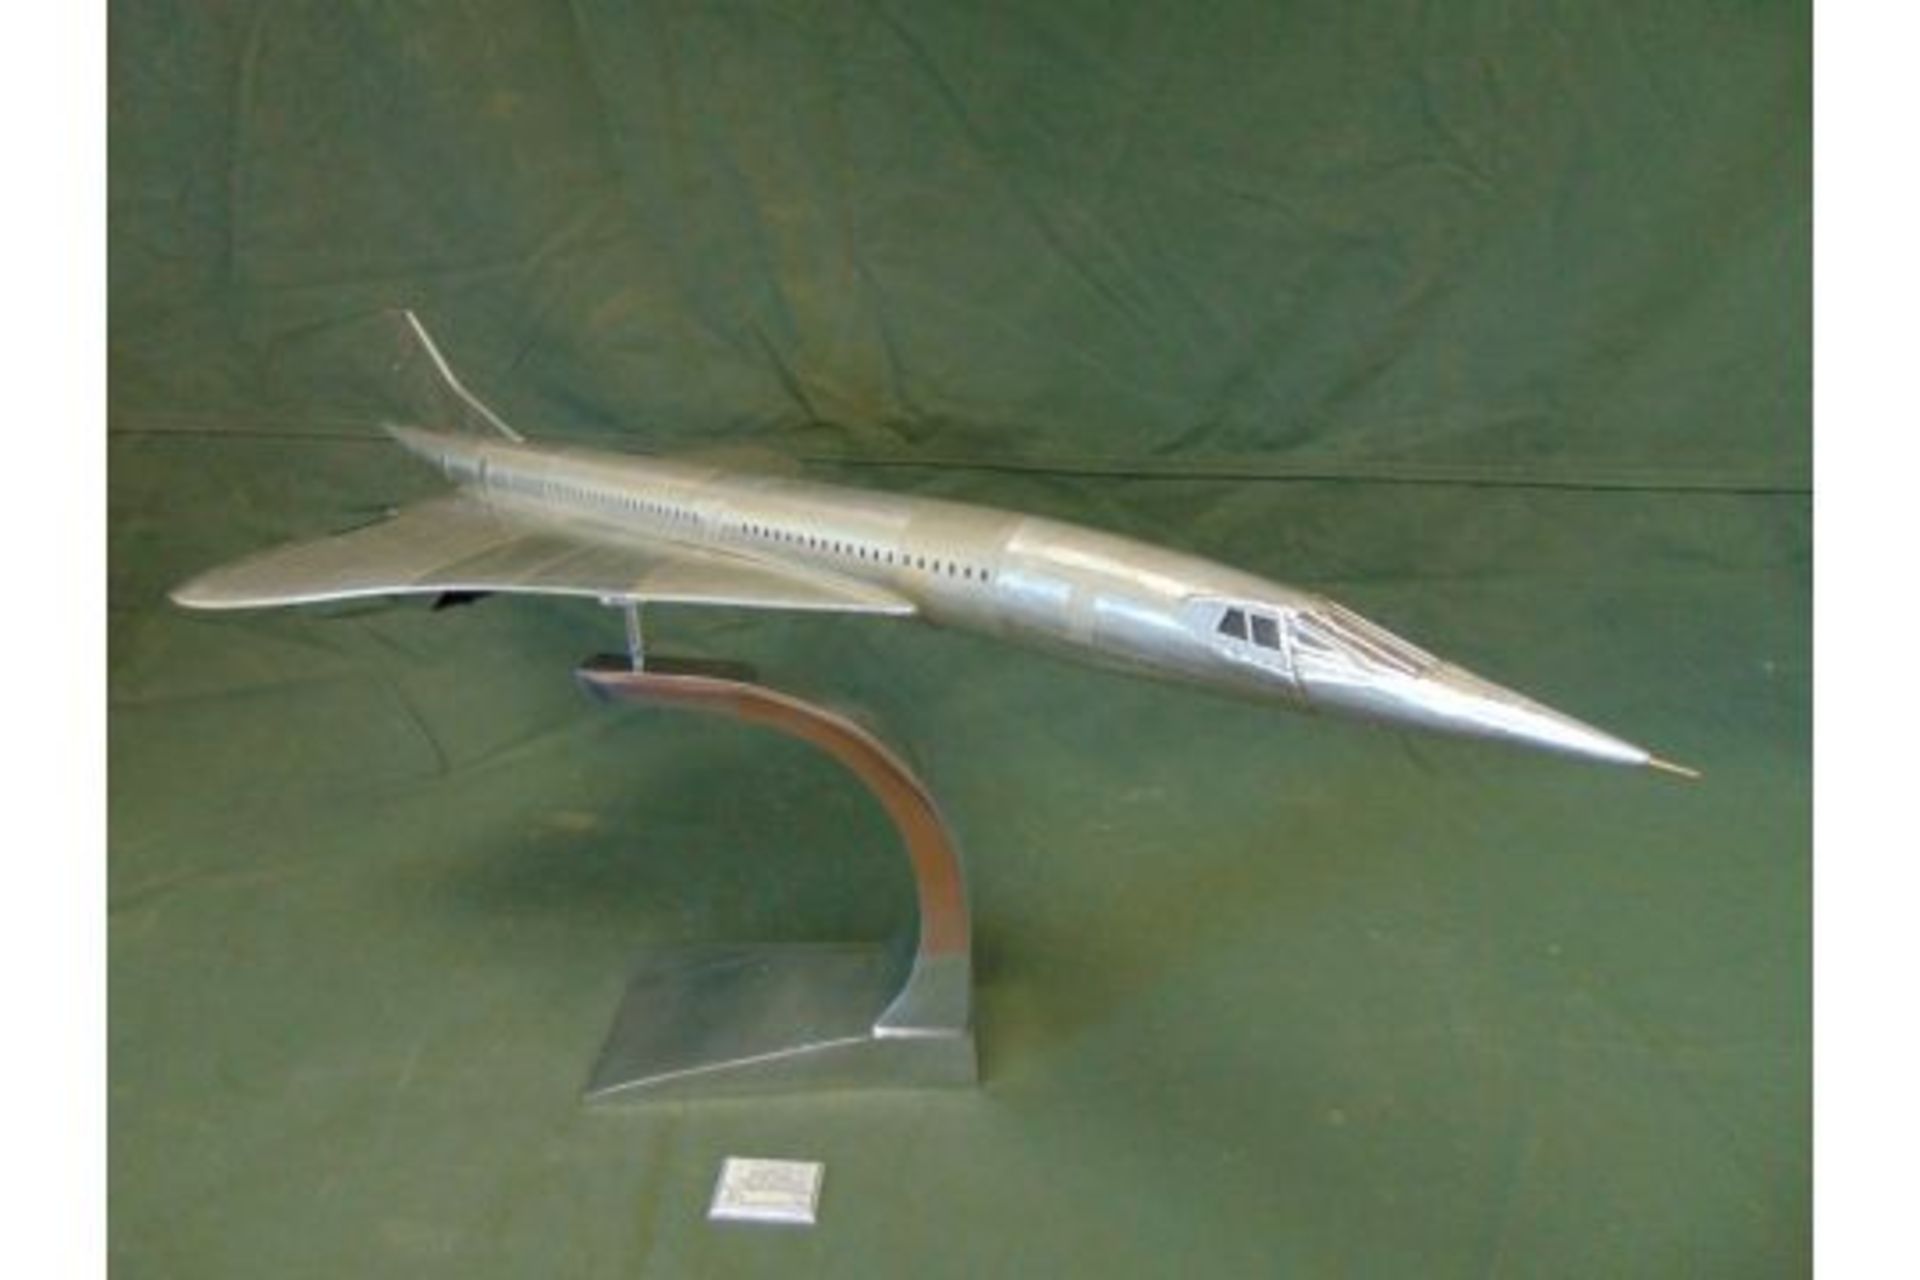 JUST LANDED A BEAUTIFUL!! Large Aluminium CONCORDE Model - Image 4 of 14